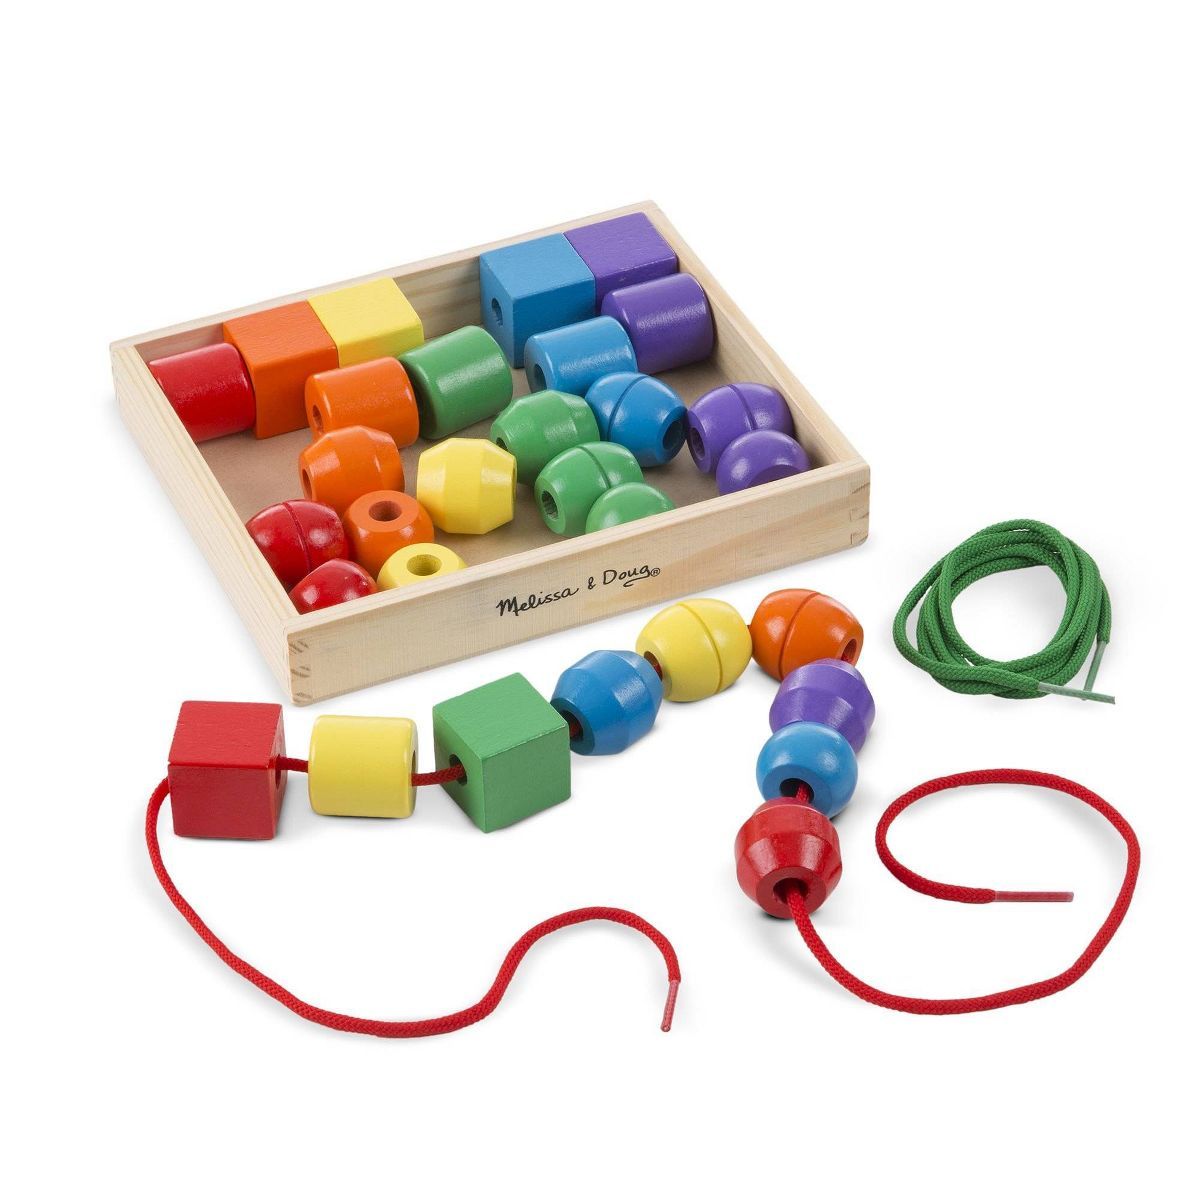 Melissa & Doug Primary Lacing Beads - Educational Toy With 30 Wooden Beads and 2 Laces | Target